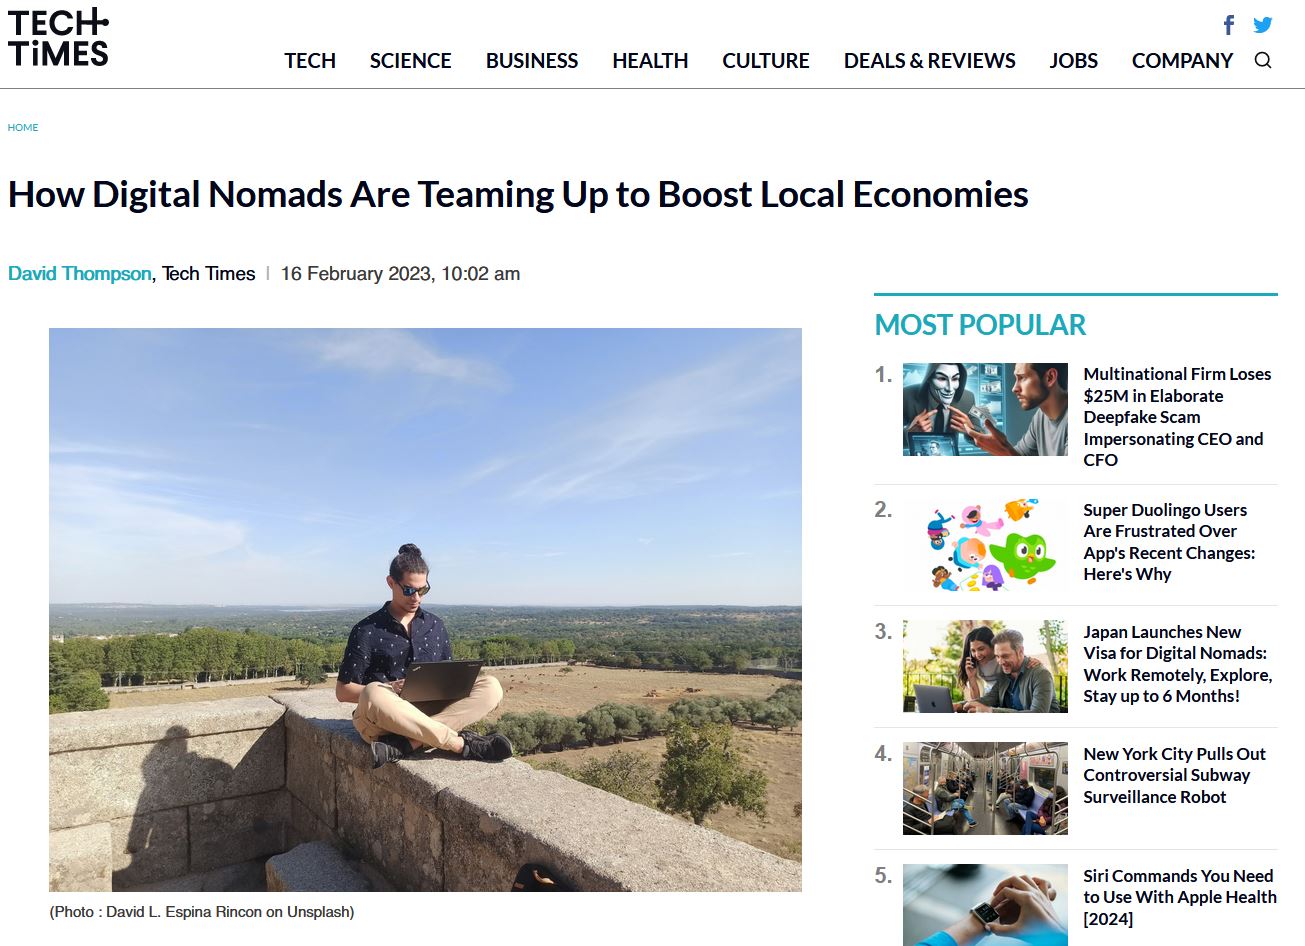 How Digital Nomads Are Teaming Up to Boost Local Economies